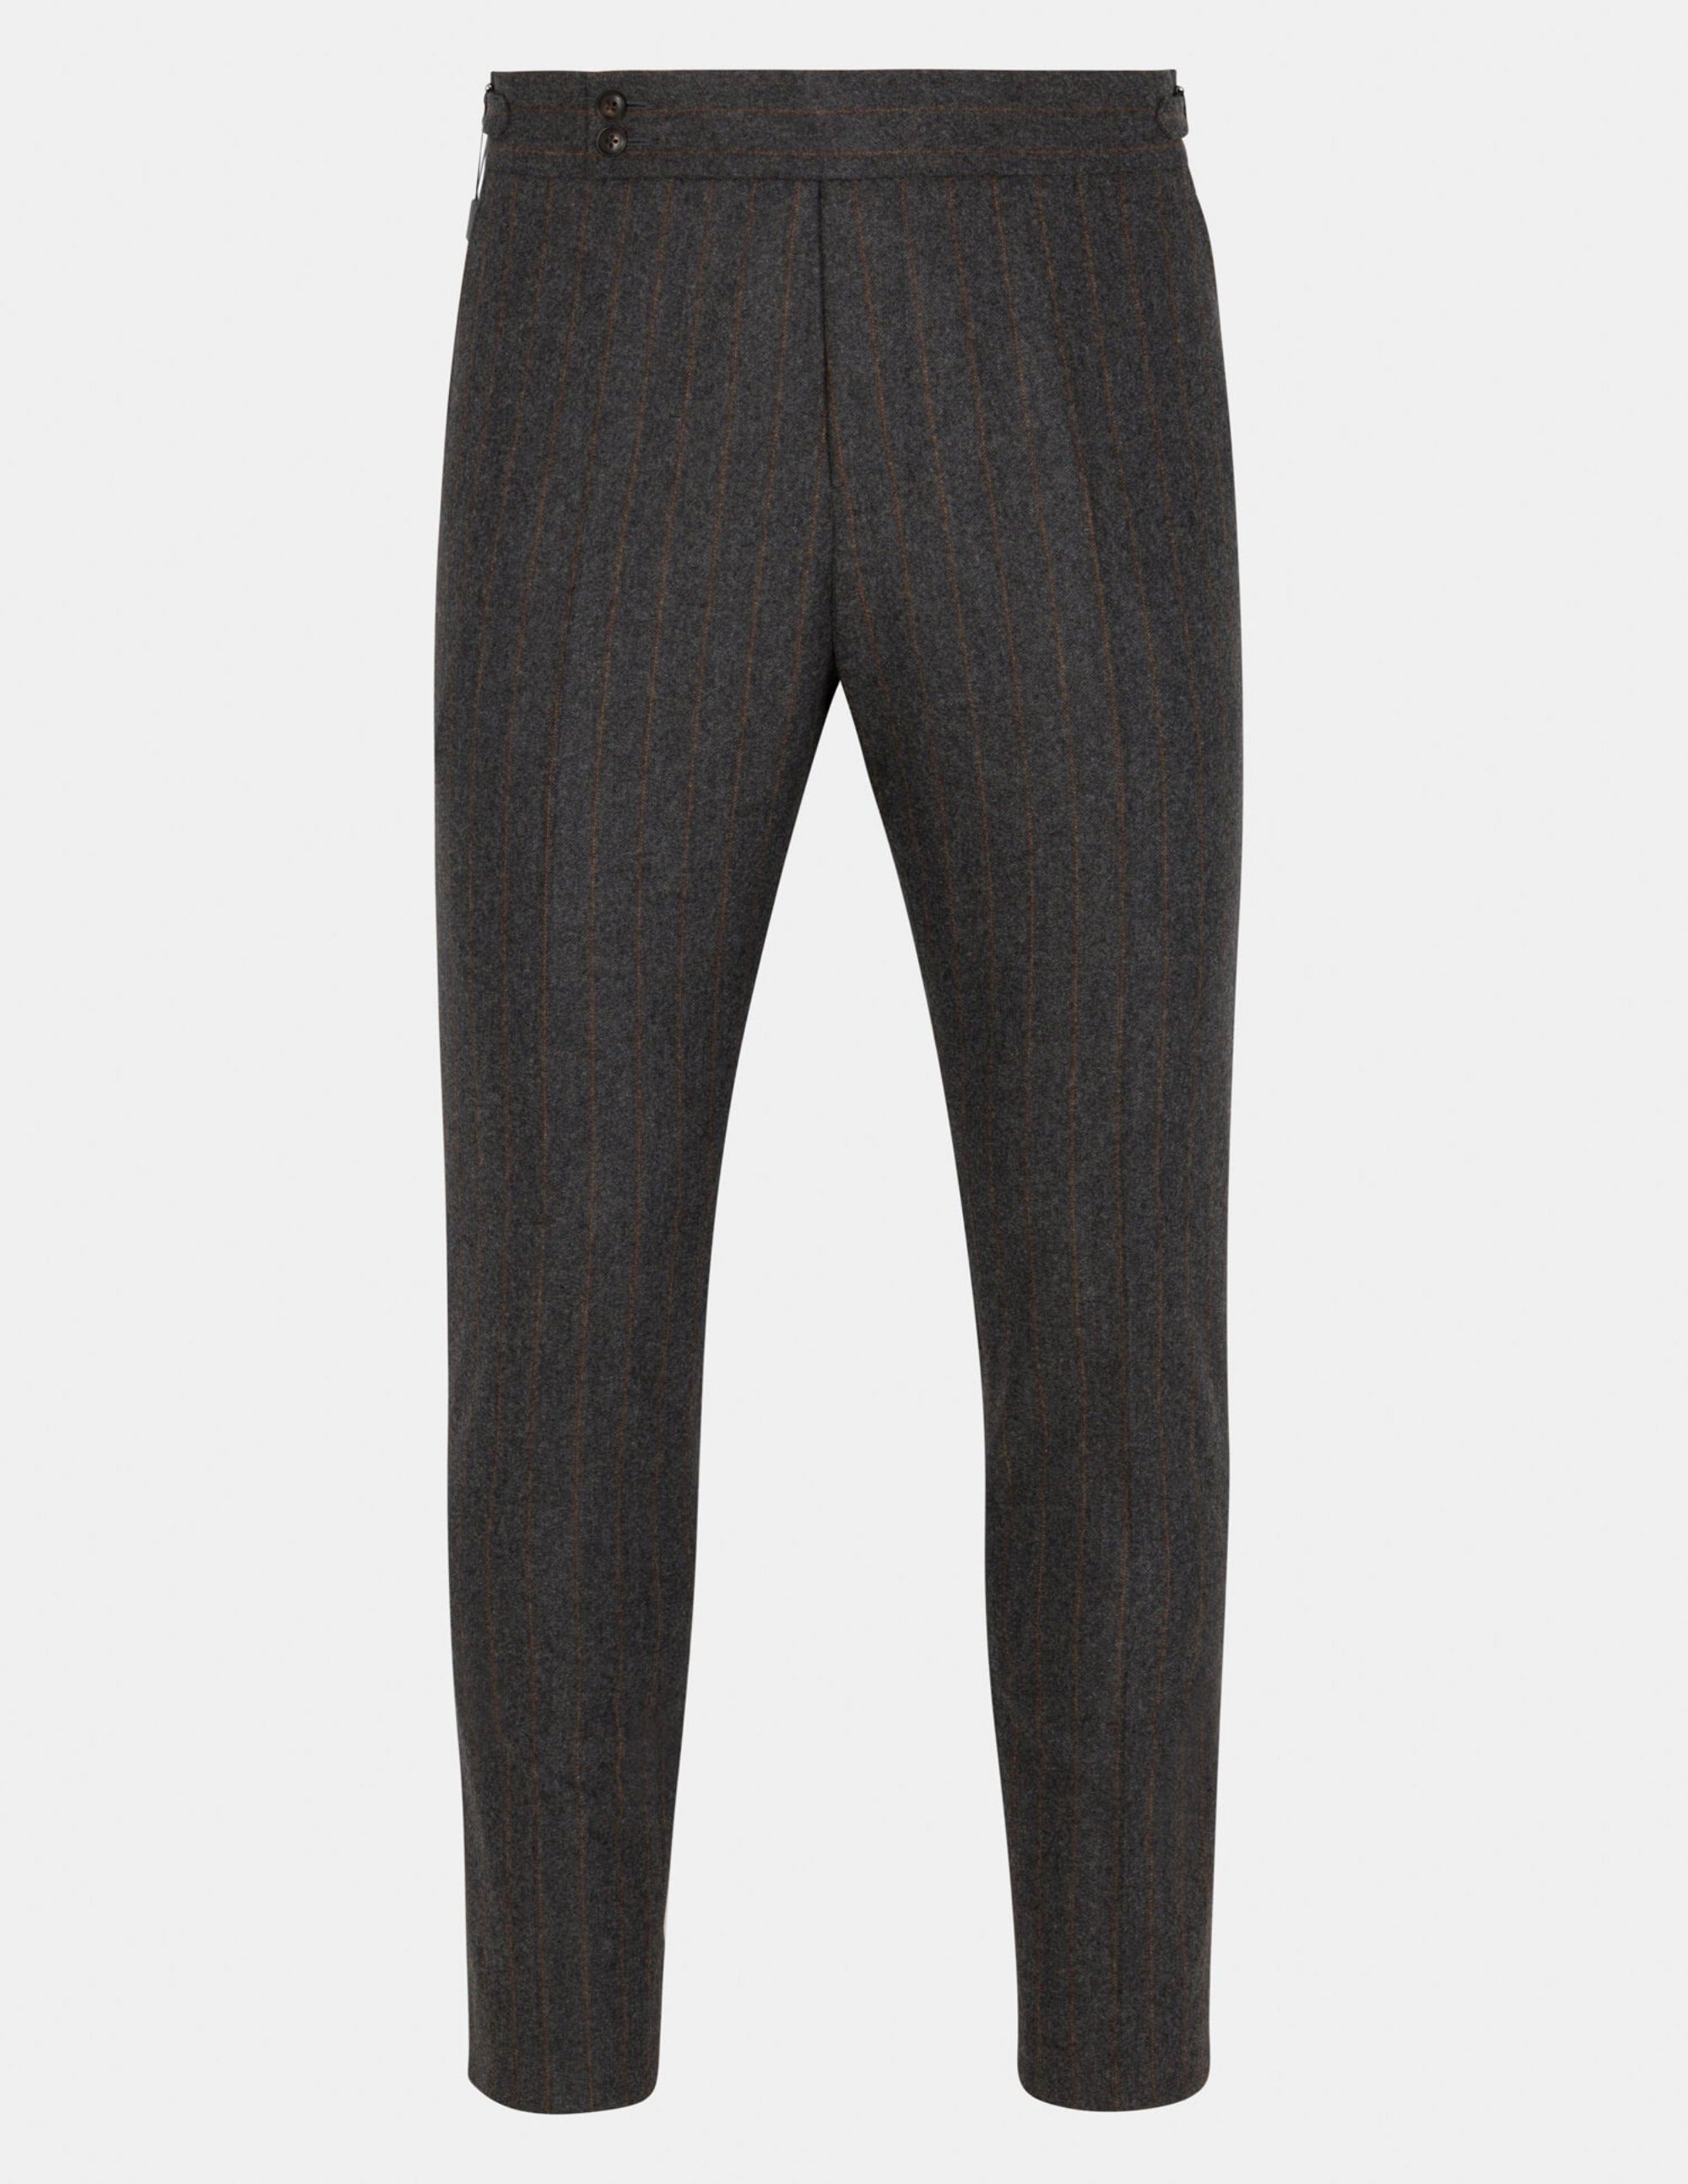 Olive Wool Trousers Double Button - Samir Bachkami